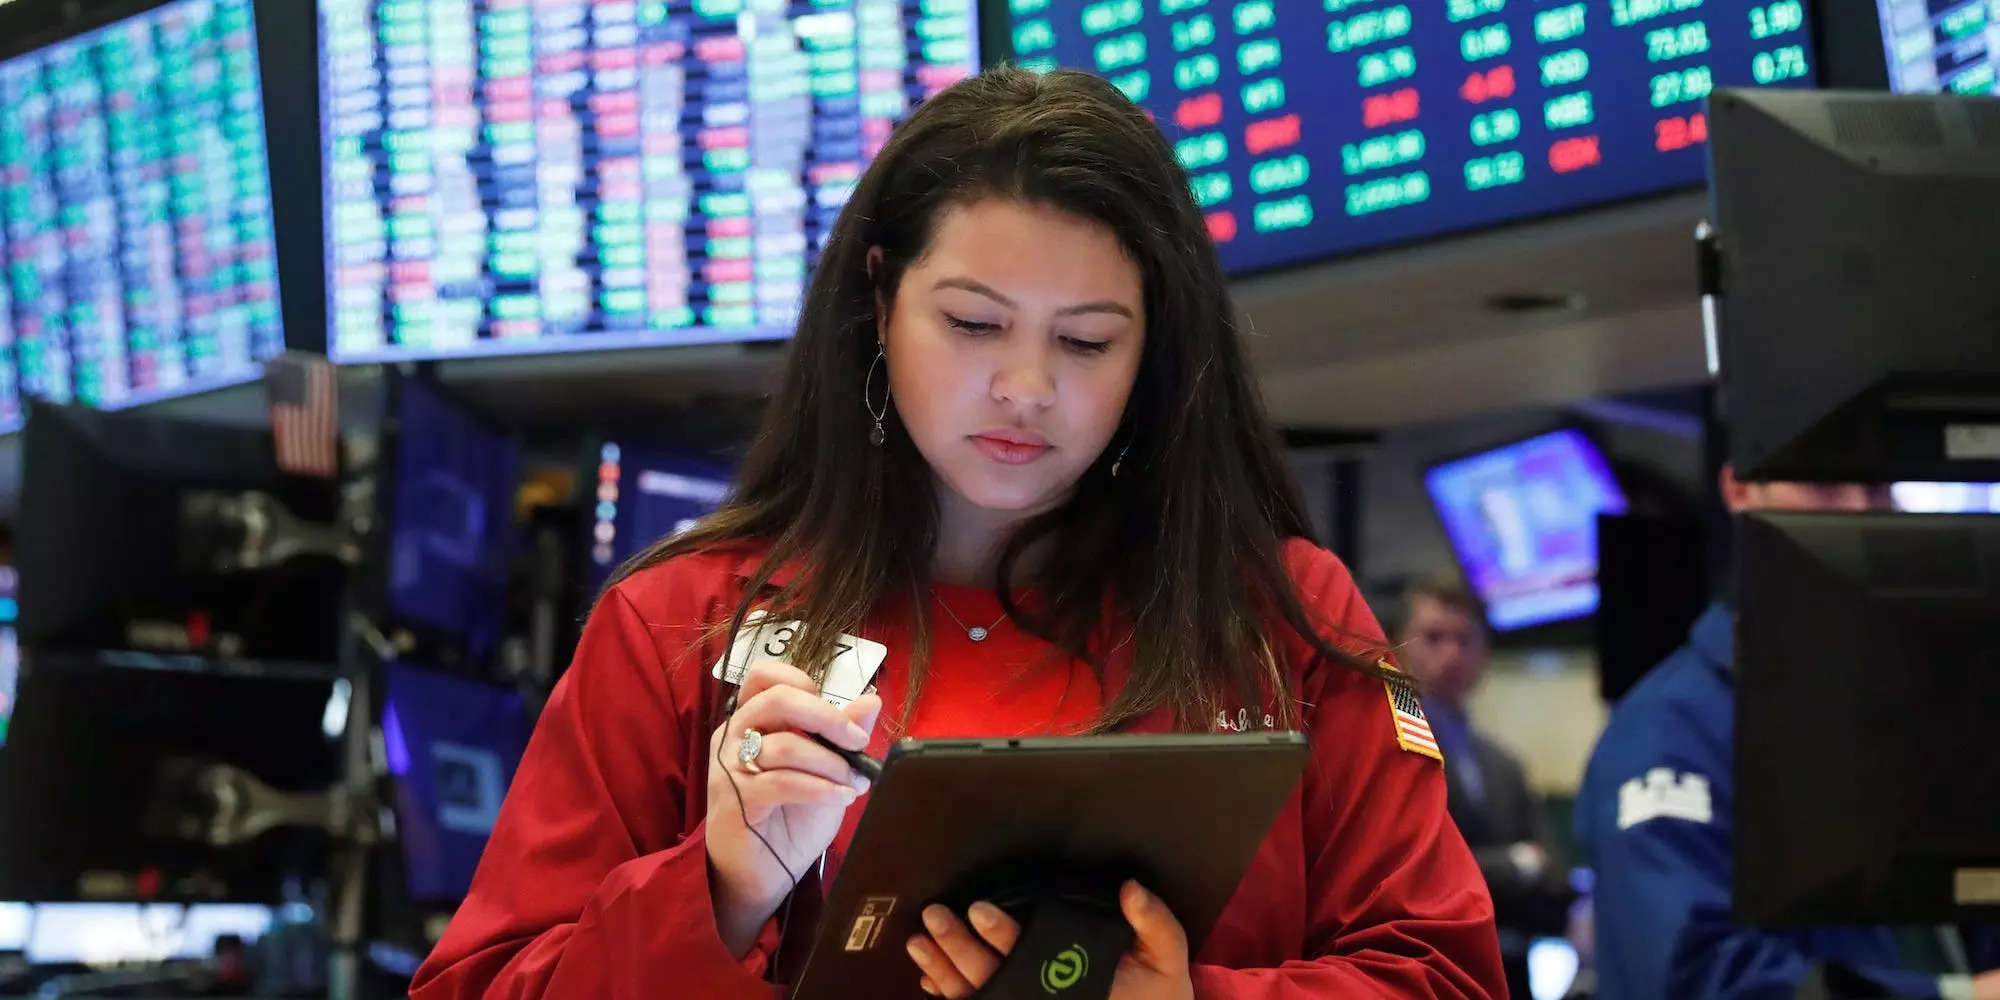 The secular bull market in stocks that began in 2009 is still intact, even as the S&P 500 trades another 15% lower, says Katie Stockton